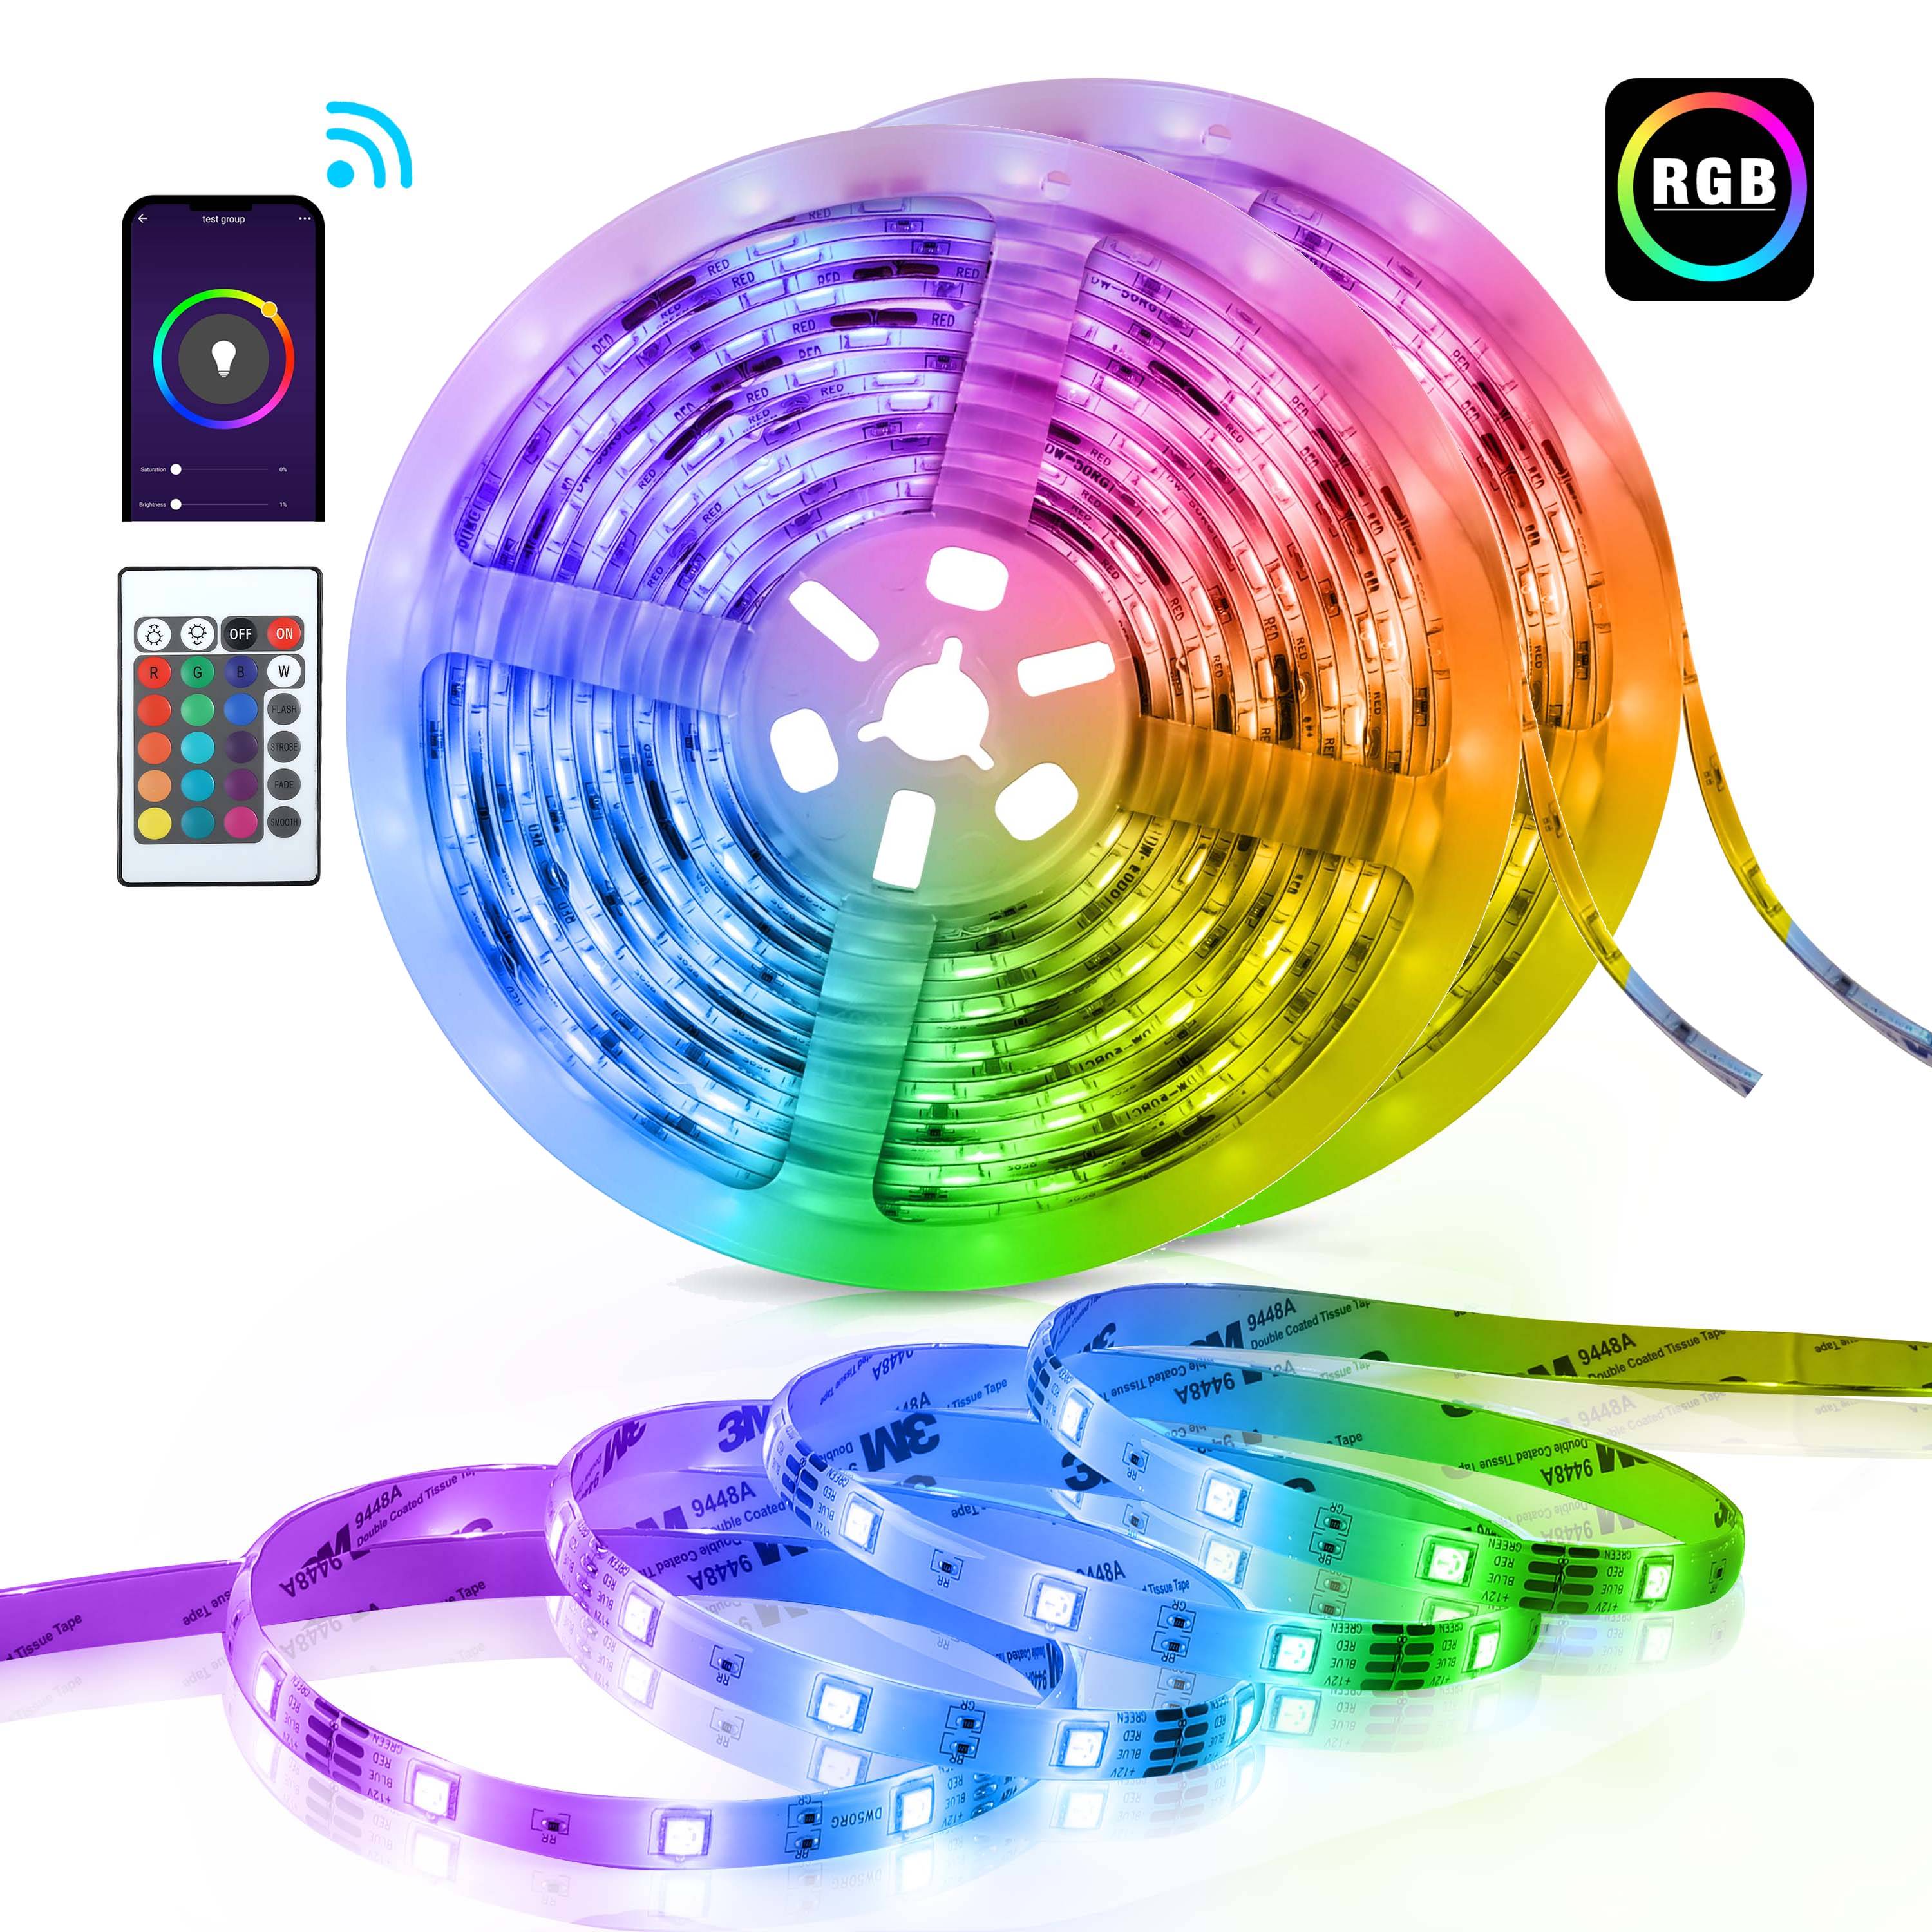 Teckin RGB LED Strip Lights, 32.8ft Strips Works with Alexa and Google Assistant, App Control Sync Color Changing LED Lights for Bedroom Decoration, Kitchen, Party, Ceiling, 300 LEDs SL07